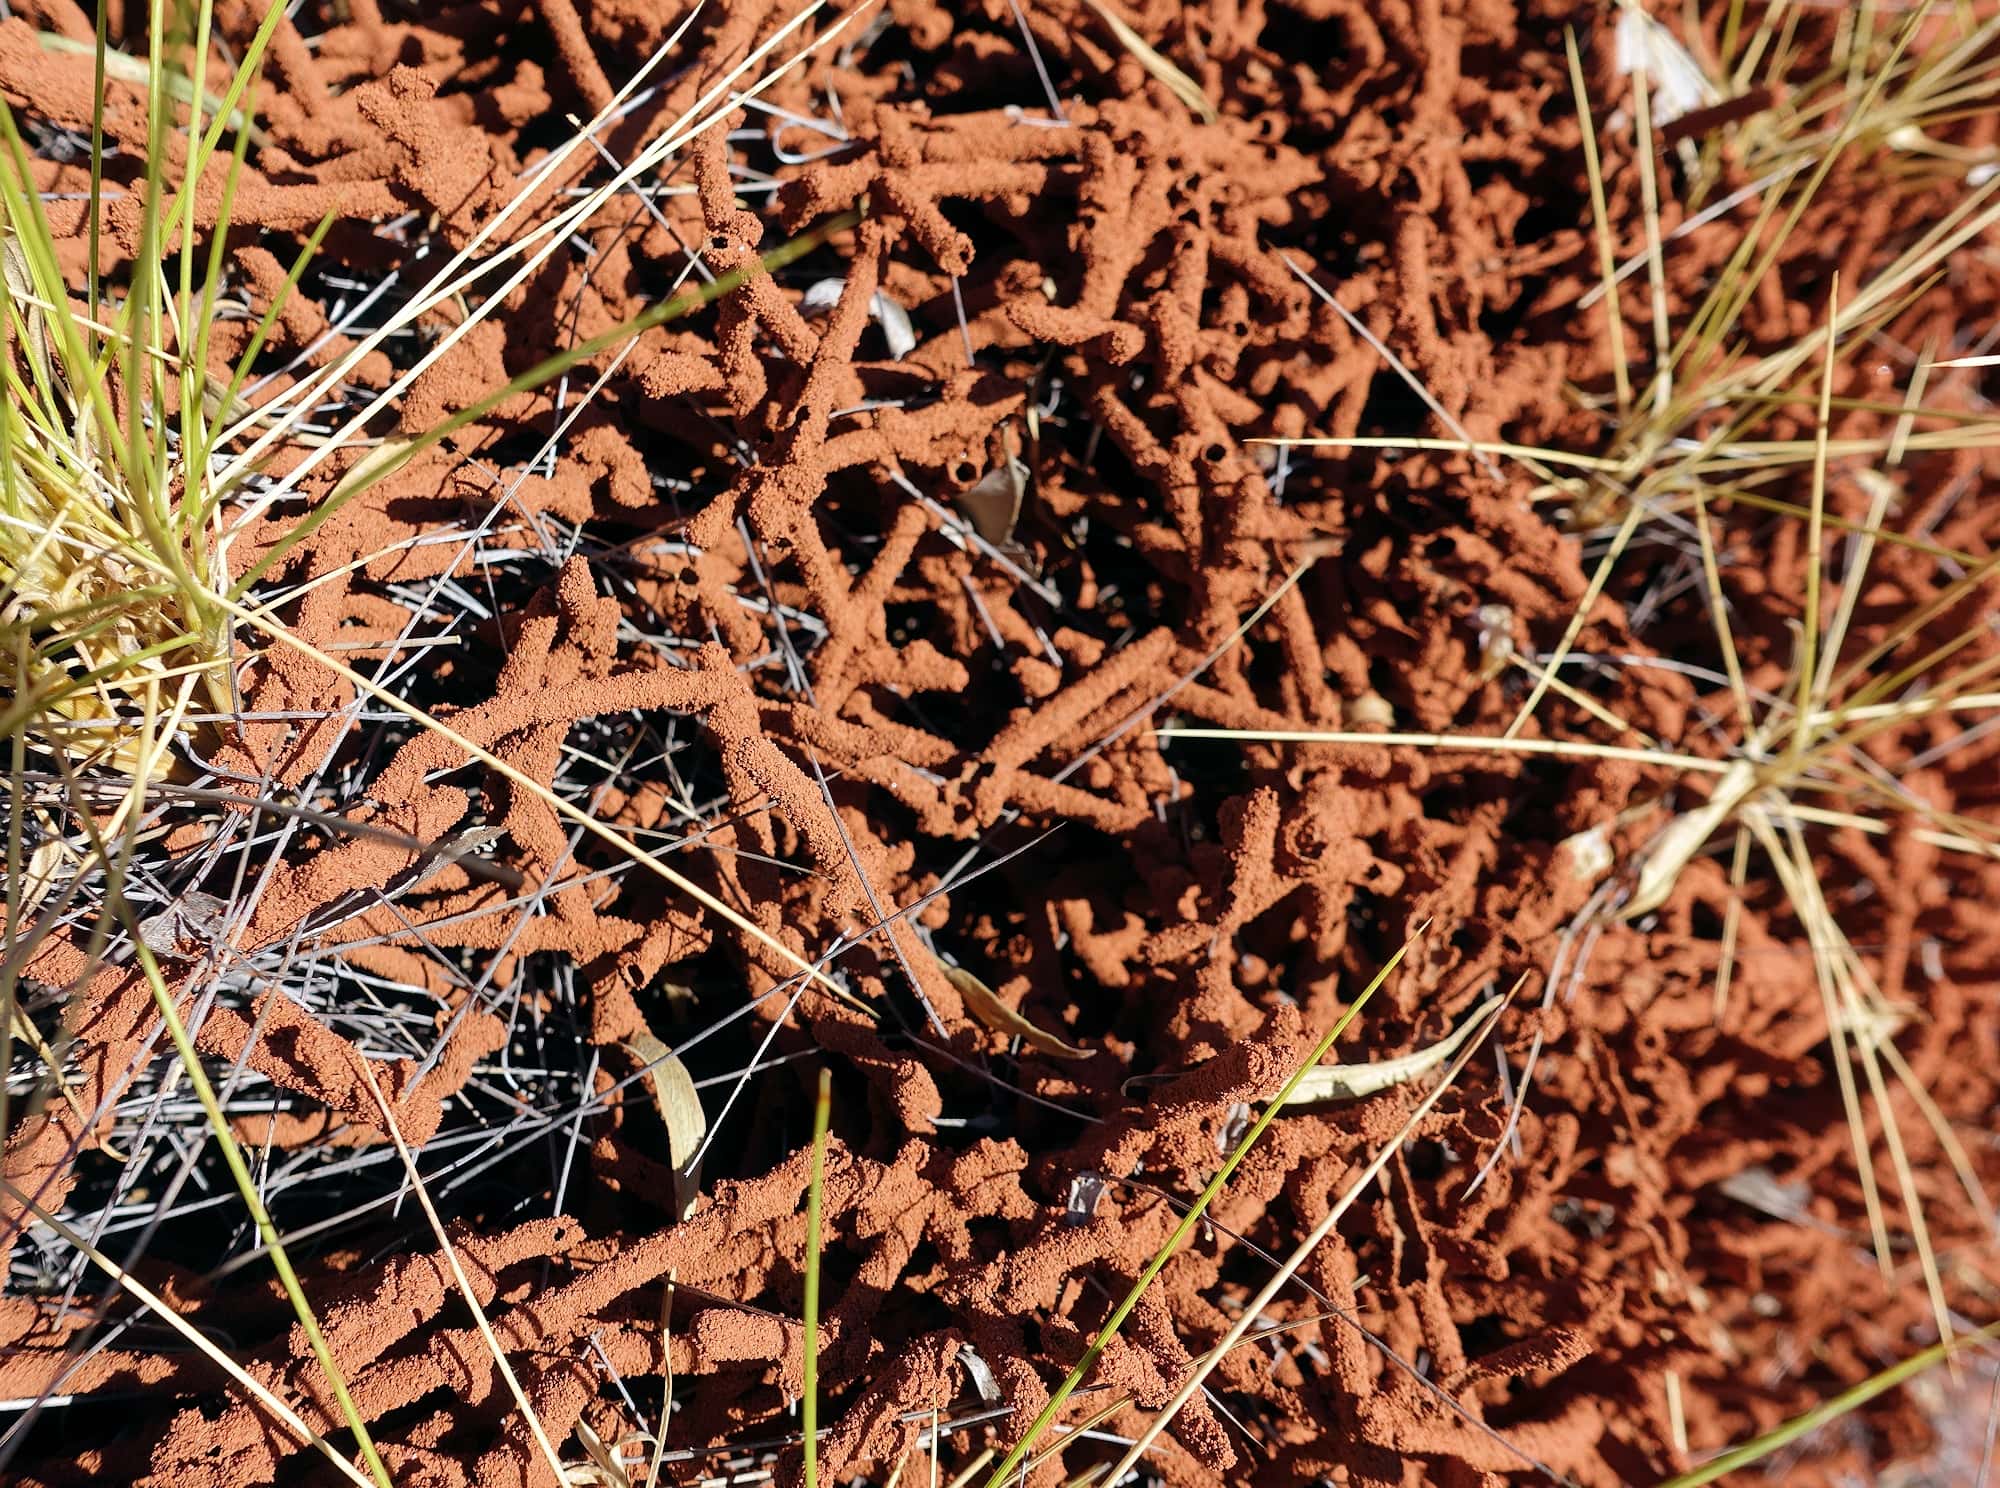 Nasutitermes triodiae creating termite mud tube along the blades of spinifex grass, Palm Valley, Finke Gorge National Park